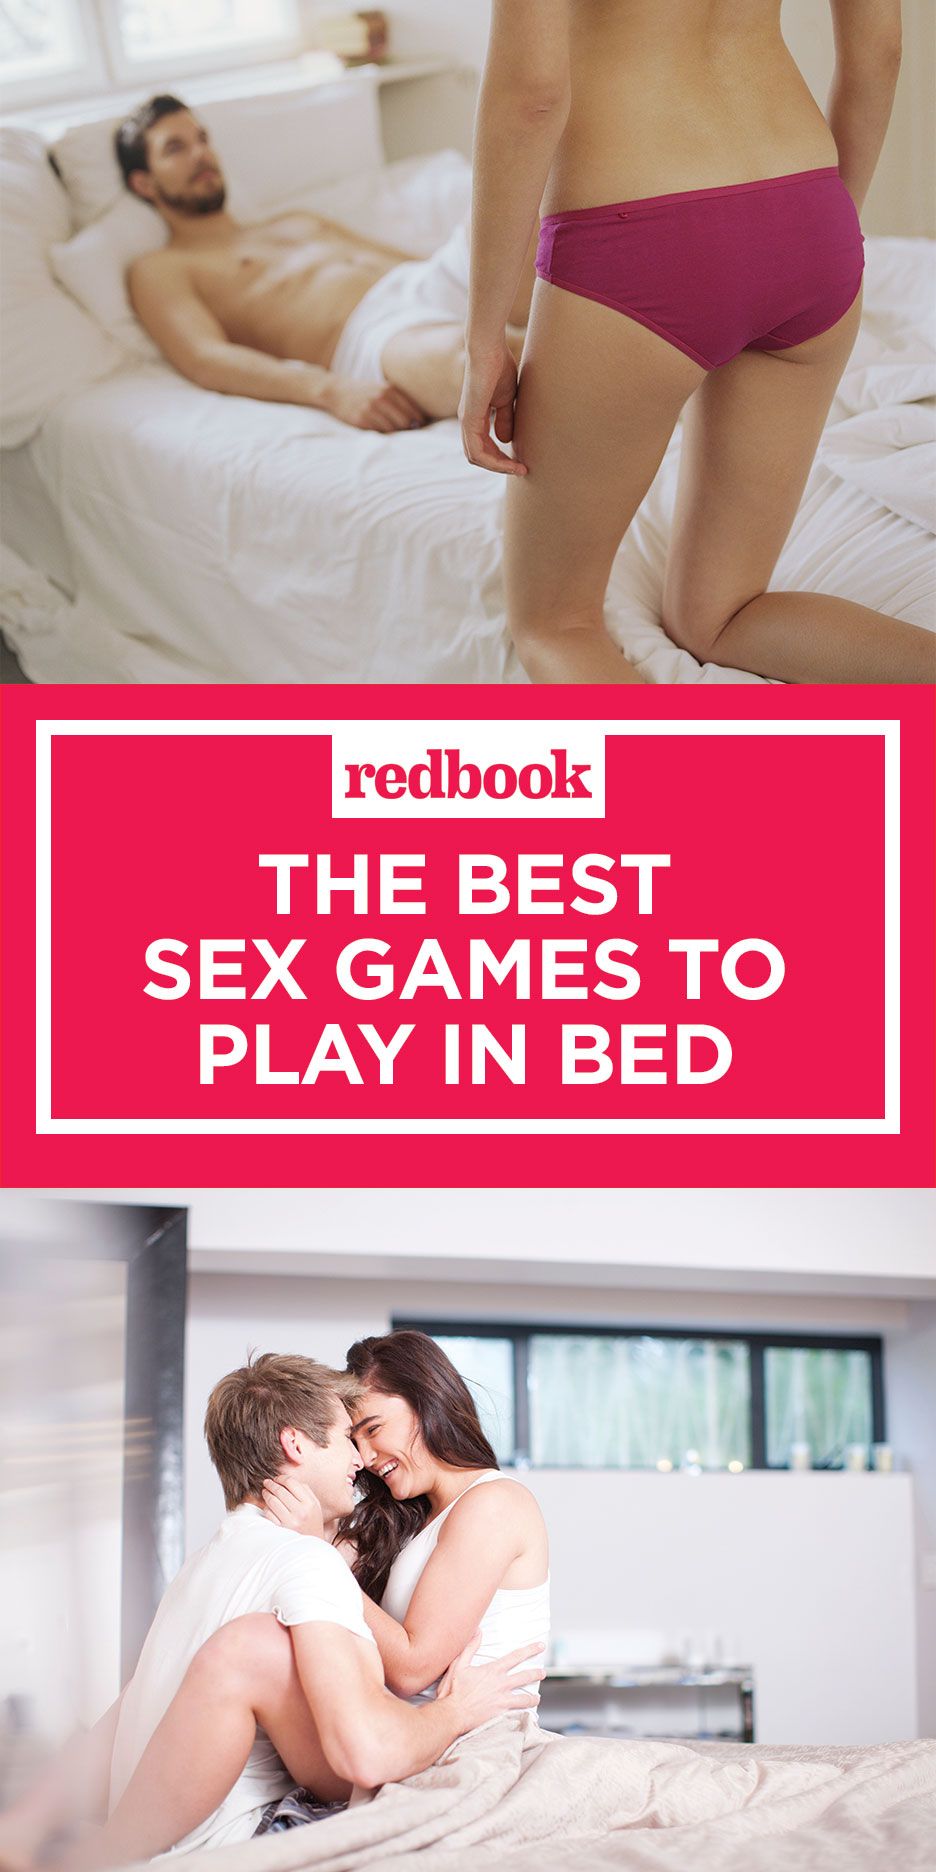 In bed sex games